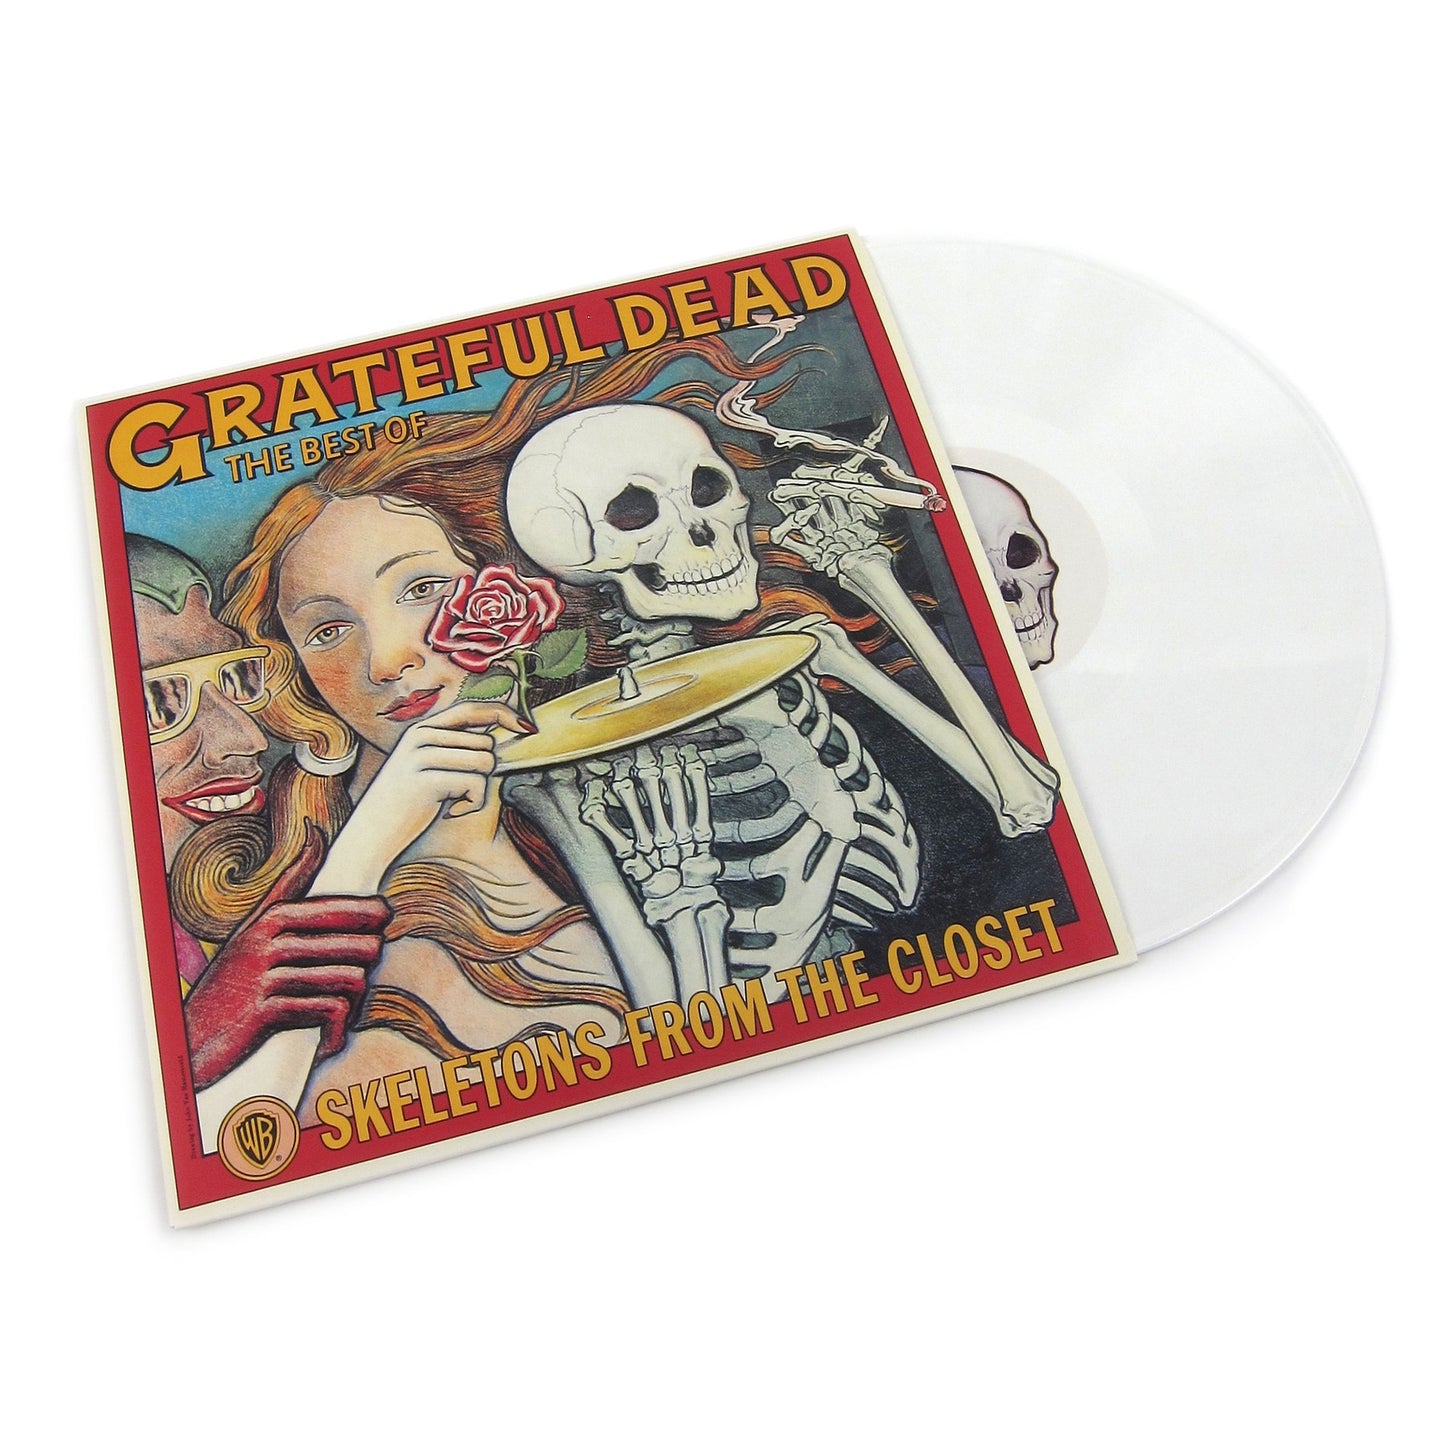 Grateful Dead ‎– The Best Of The Grateful Dead: Skeletons From The Closet